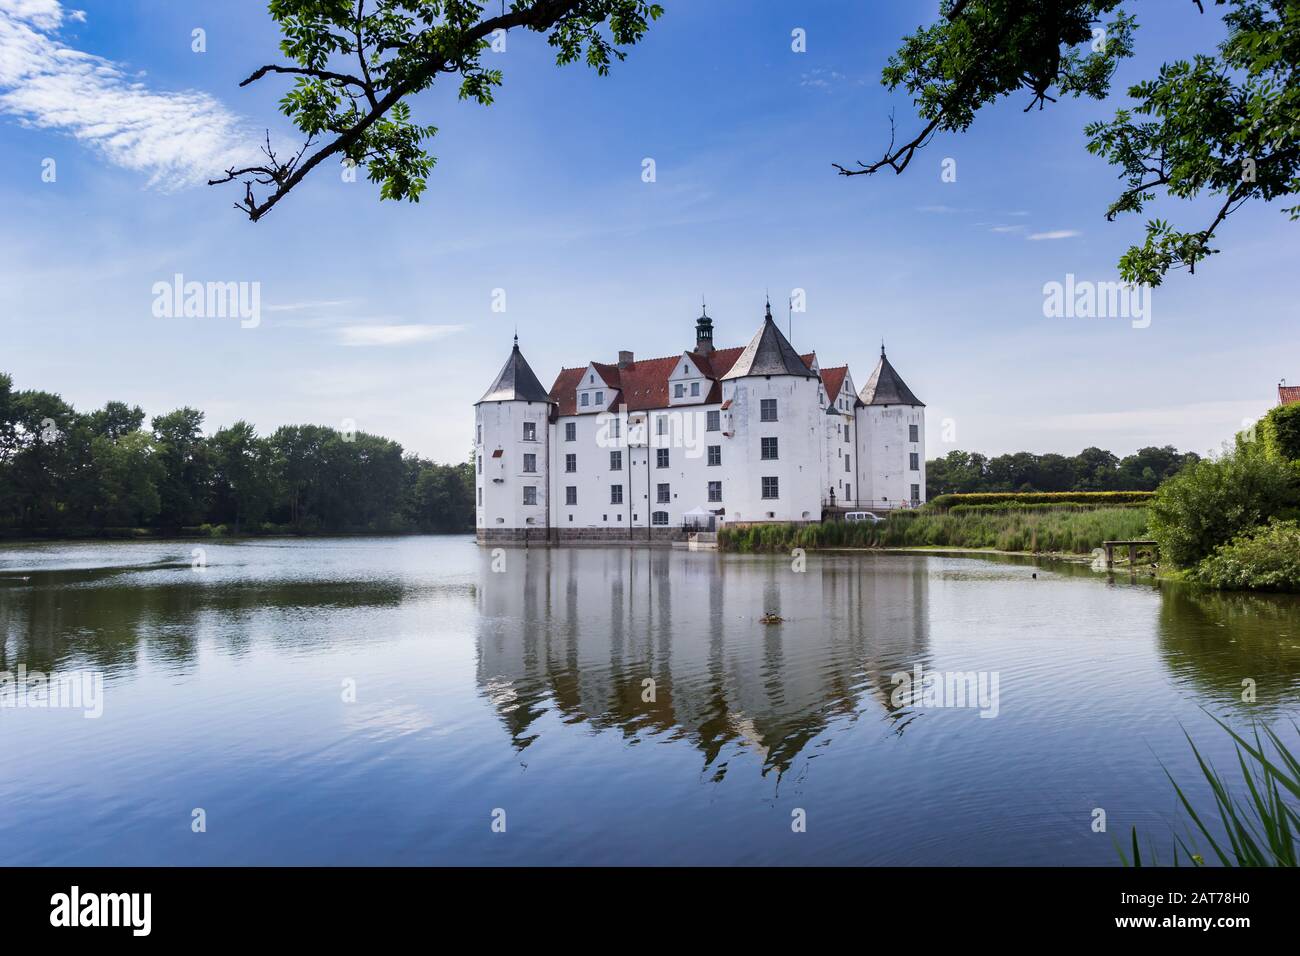 Historic castle with reflection in the lake in Glucksburg, Germany Stock Photo